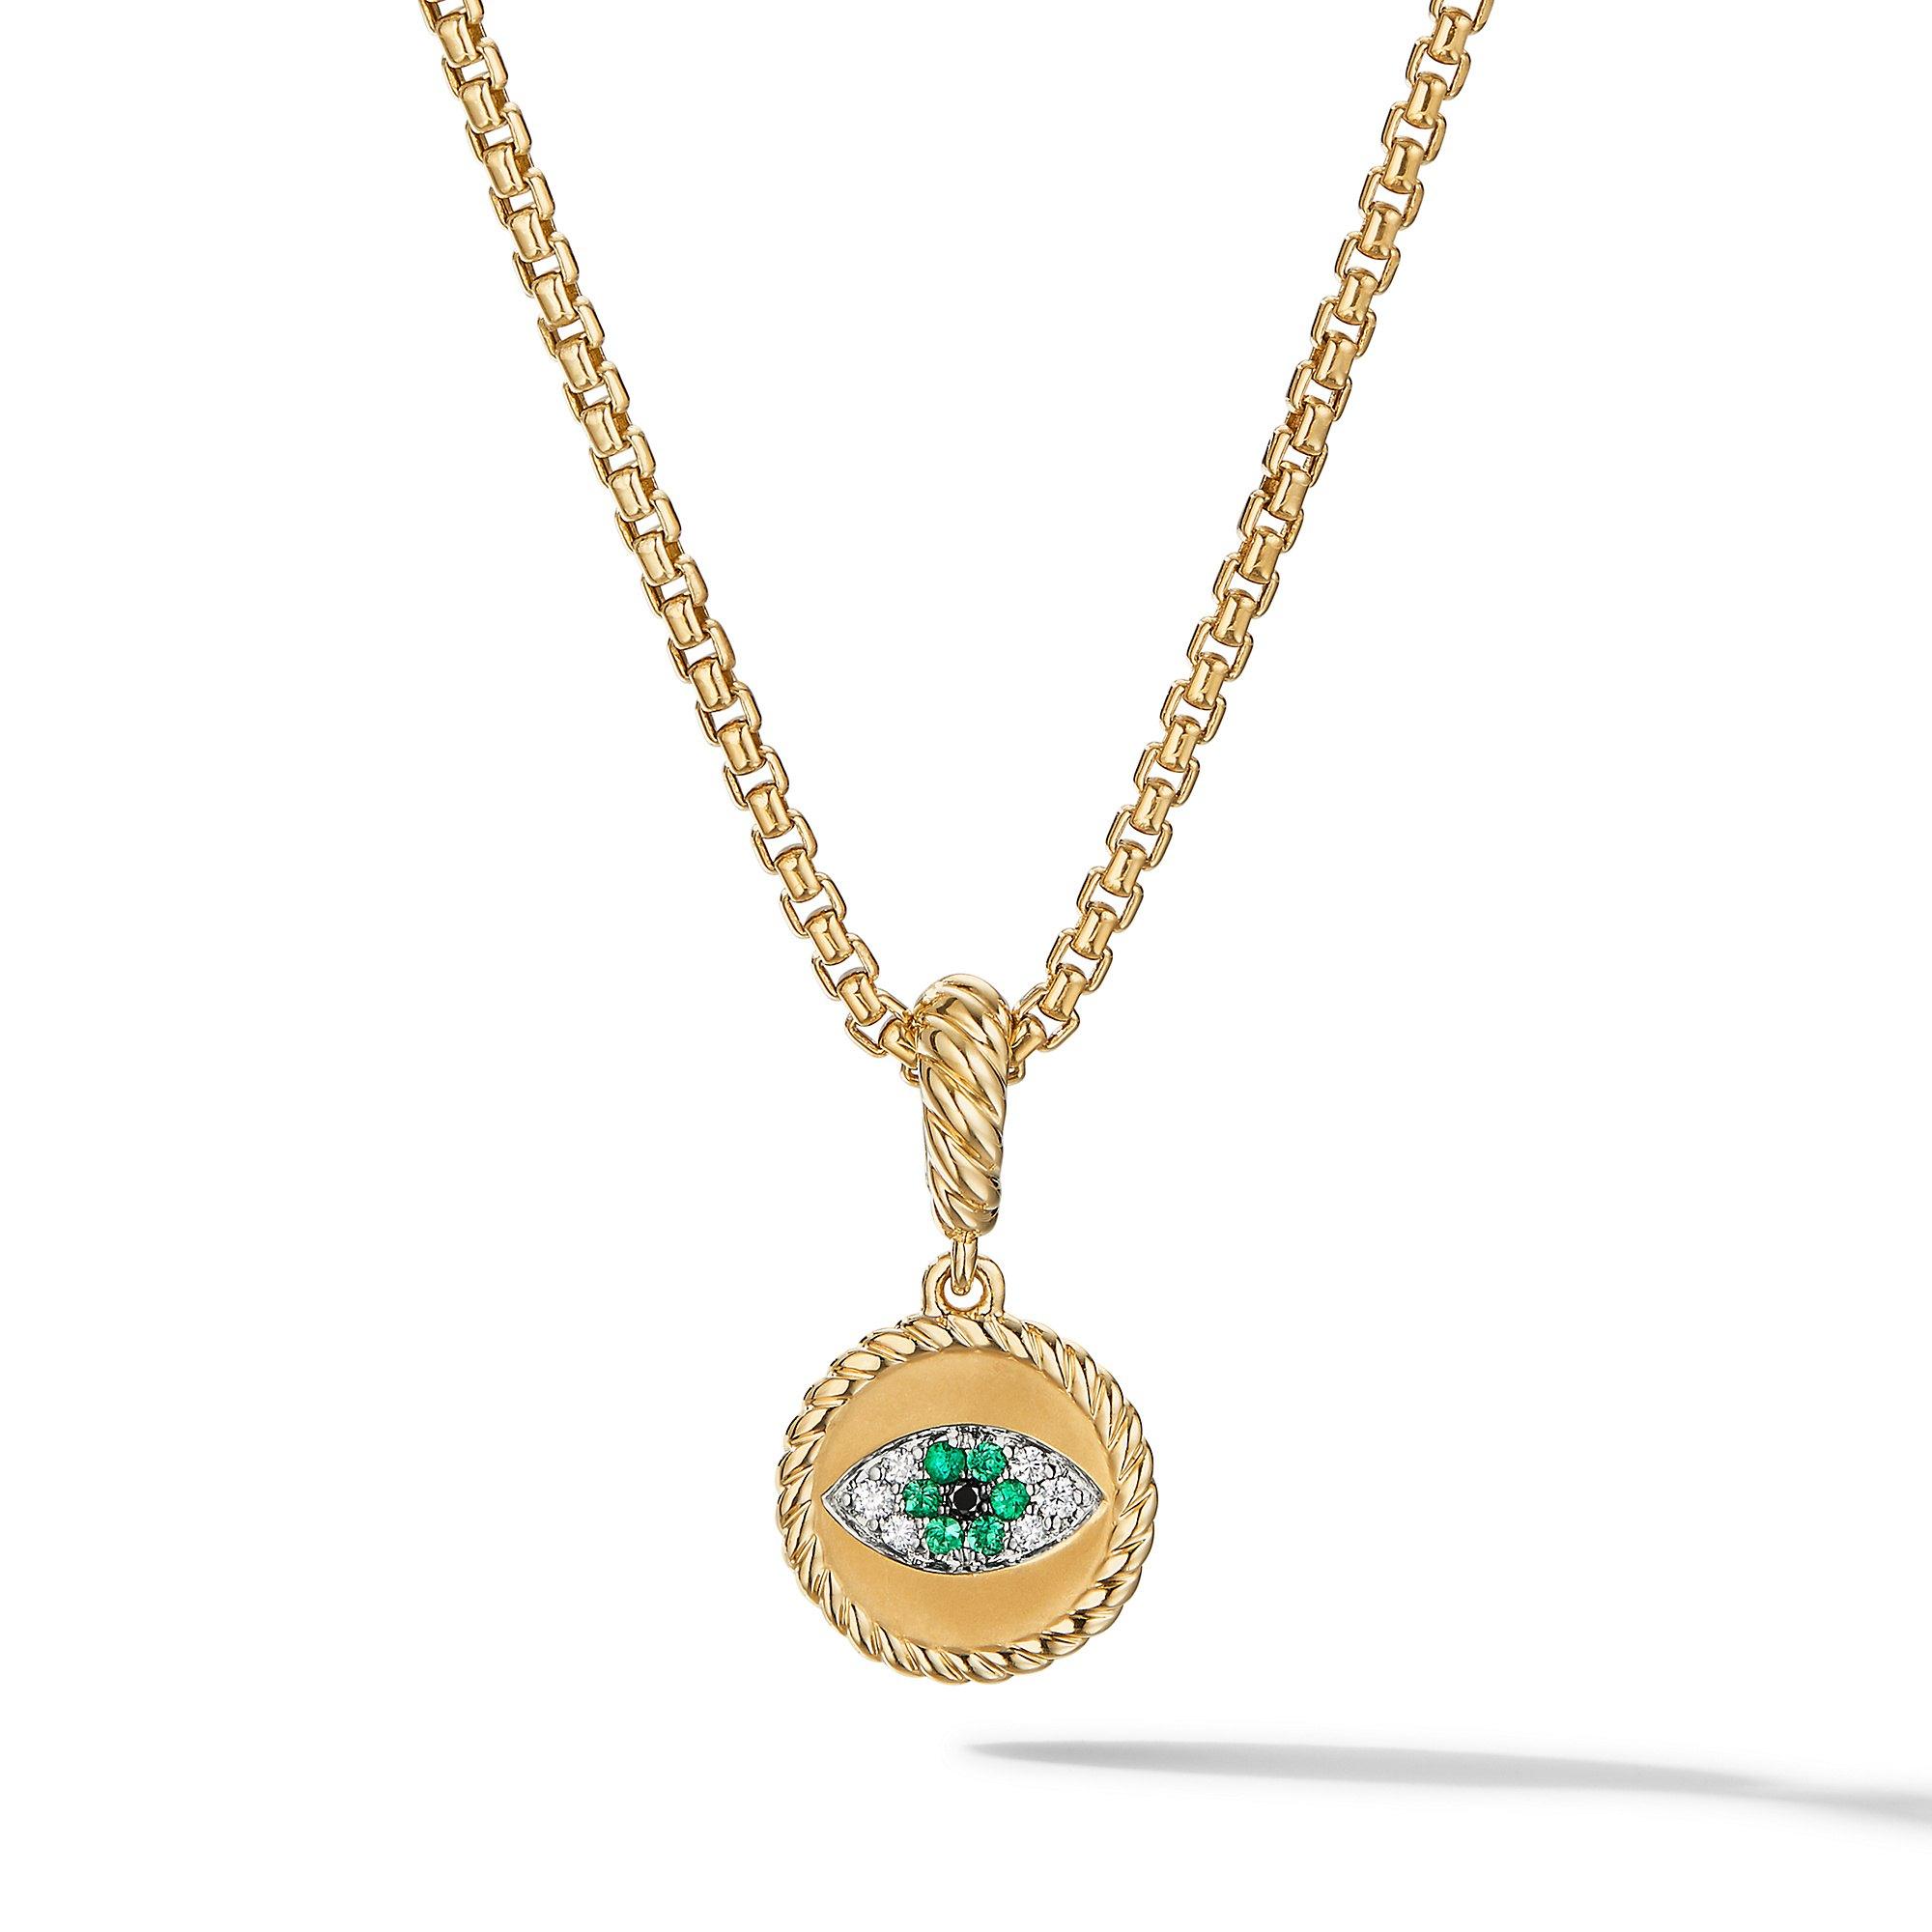 David Yurman Evil Eye Amulet in 18k Yellow Gold with Pave Emeralds and Diamonds